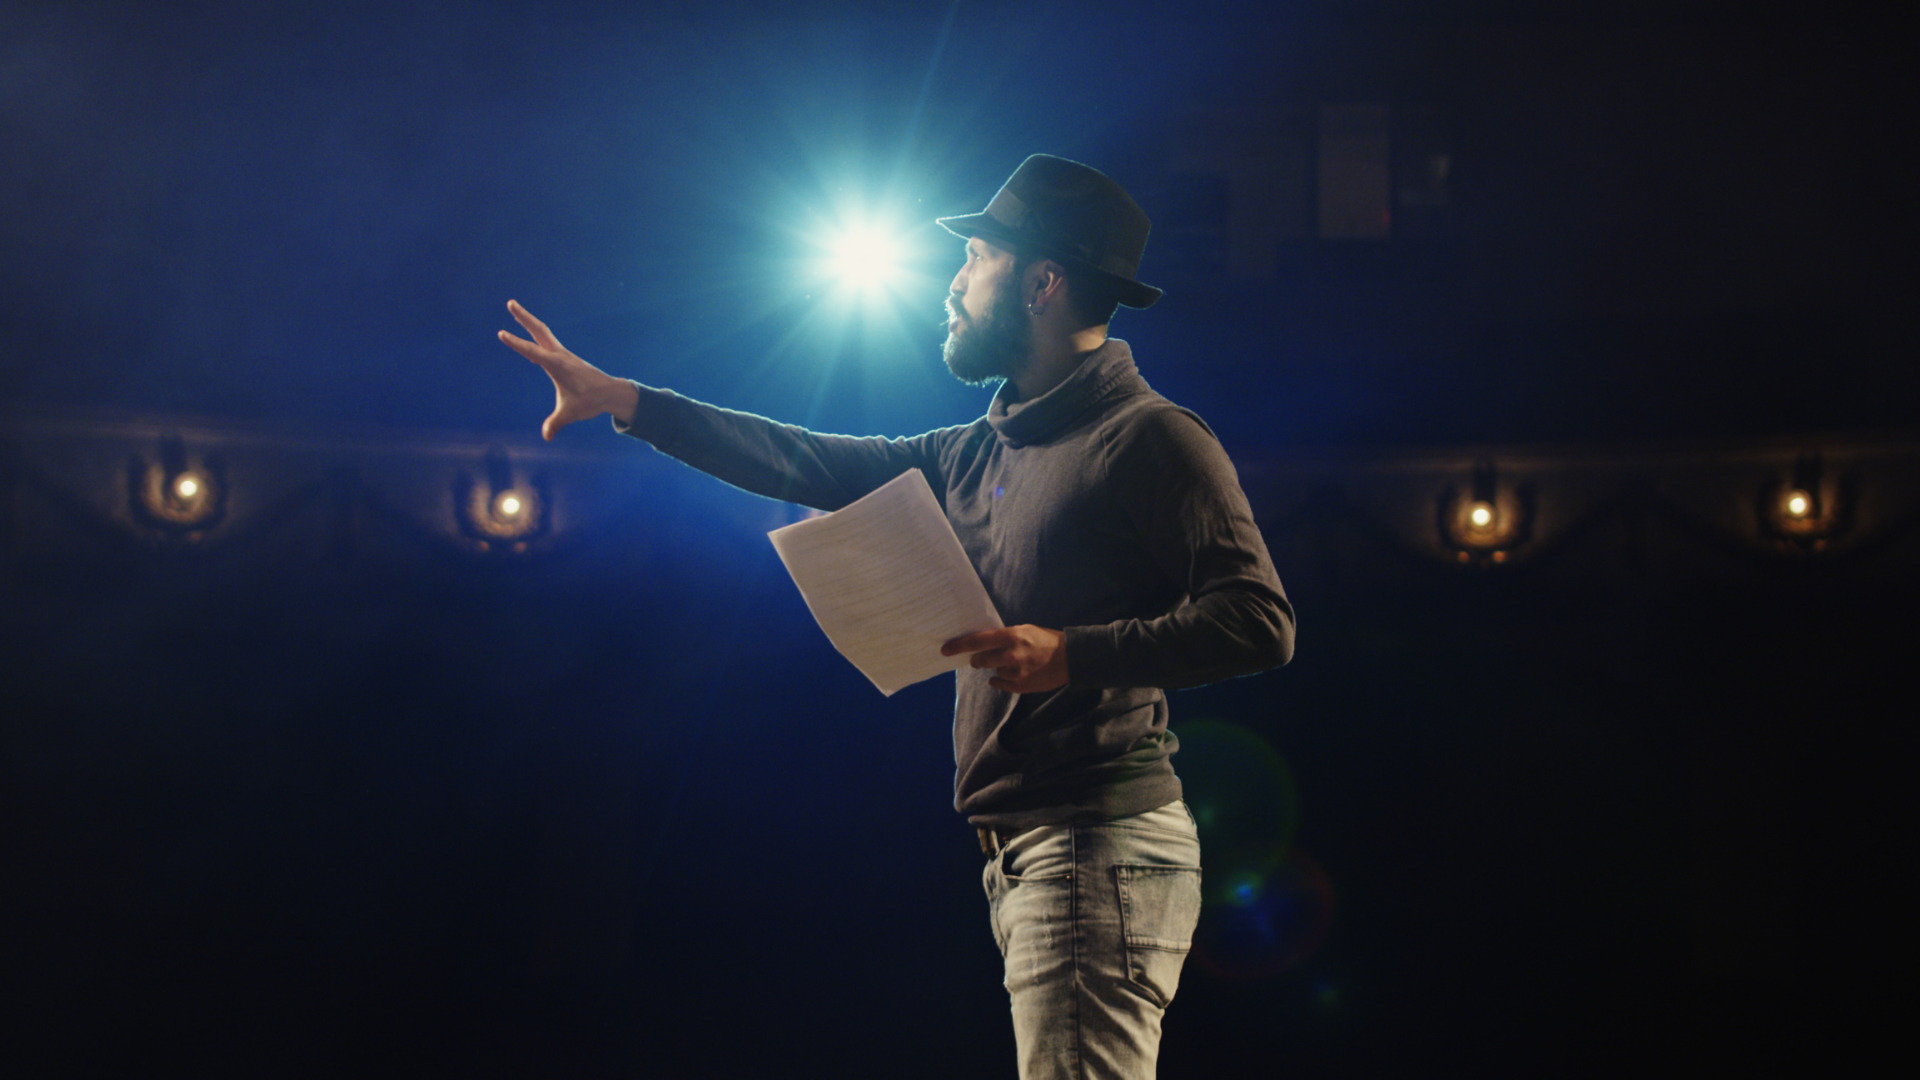 In the theatre, a man in a hat confidently holds a piece of paper in front of a spotlight.